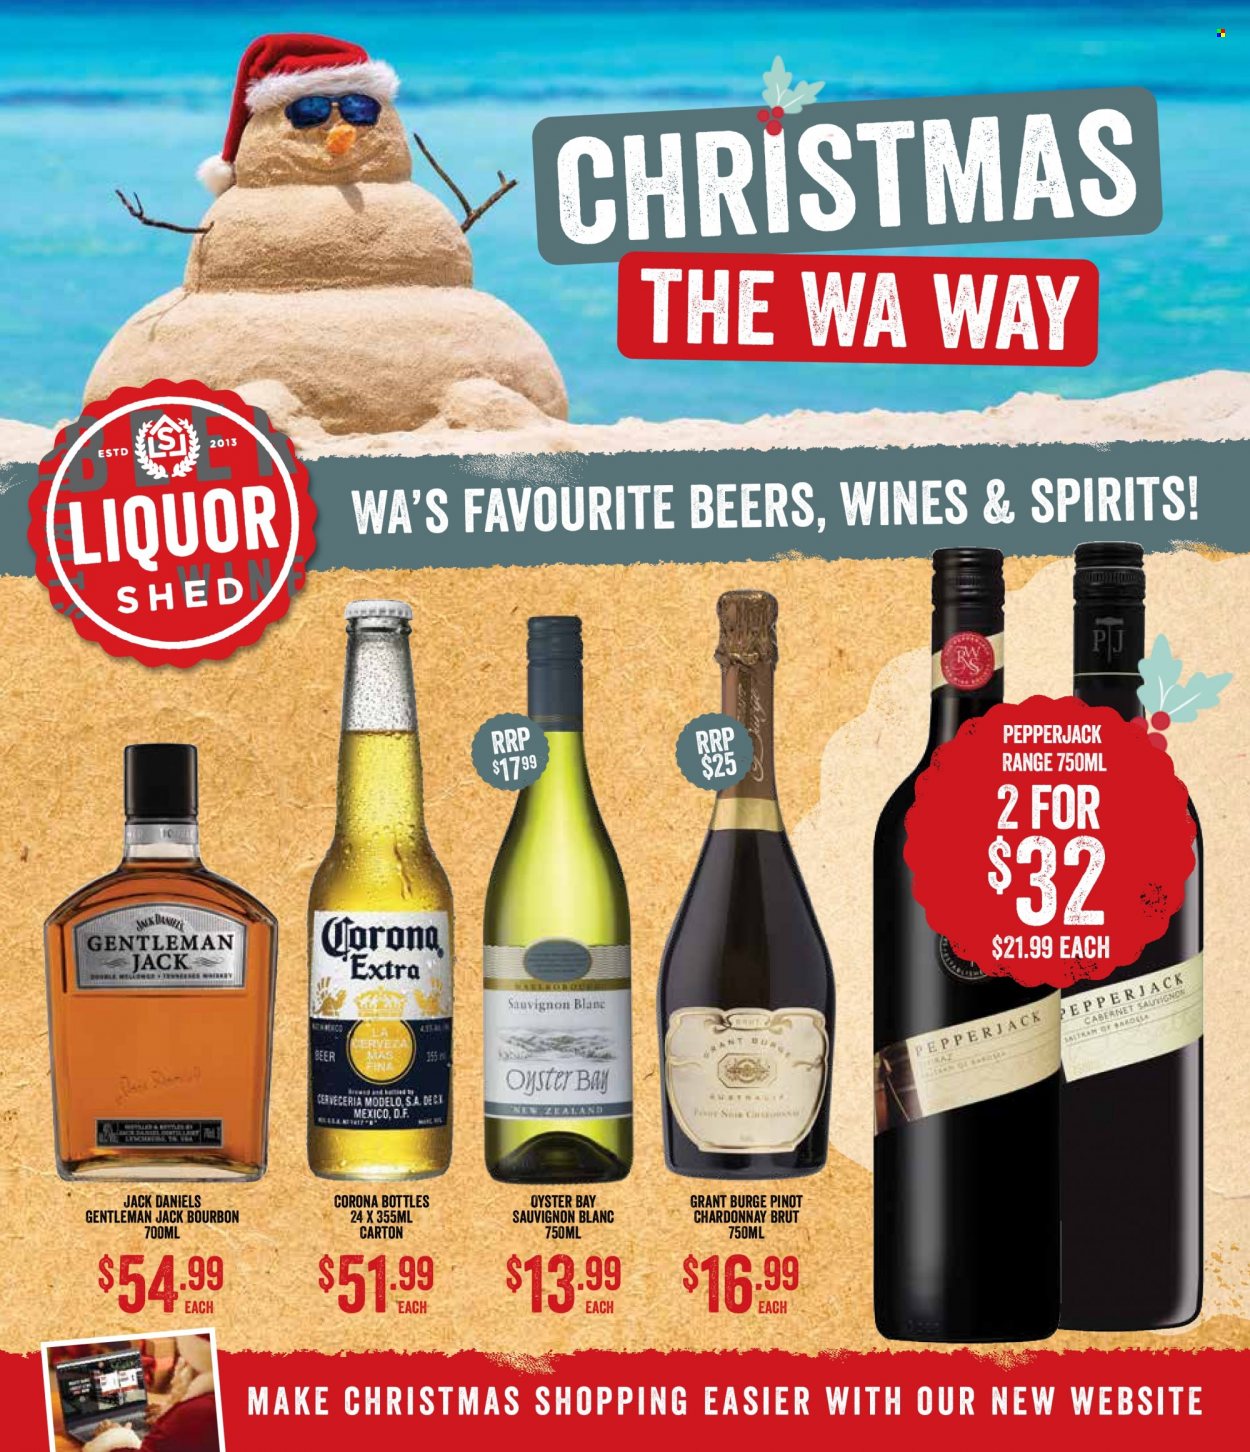 thumbnail - Spudshed Catalogue - 30 Nov 2022 - 6 Dec 2022 - Sales products - oysters, Jack Daniel's, Pepper Jack cheese, Cabernet Sauvignon, red wine, white wine, Chardonnay, wine, Sauvignon Blanc, bourbon, Tennessee Whiskey, whiskey, whisky, beer, Corona Extra, Modelo, Brut. Page 10.